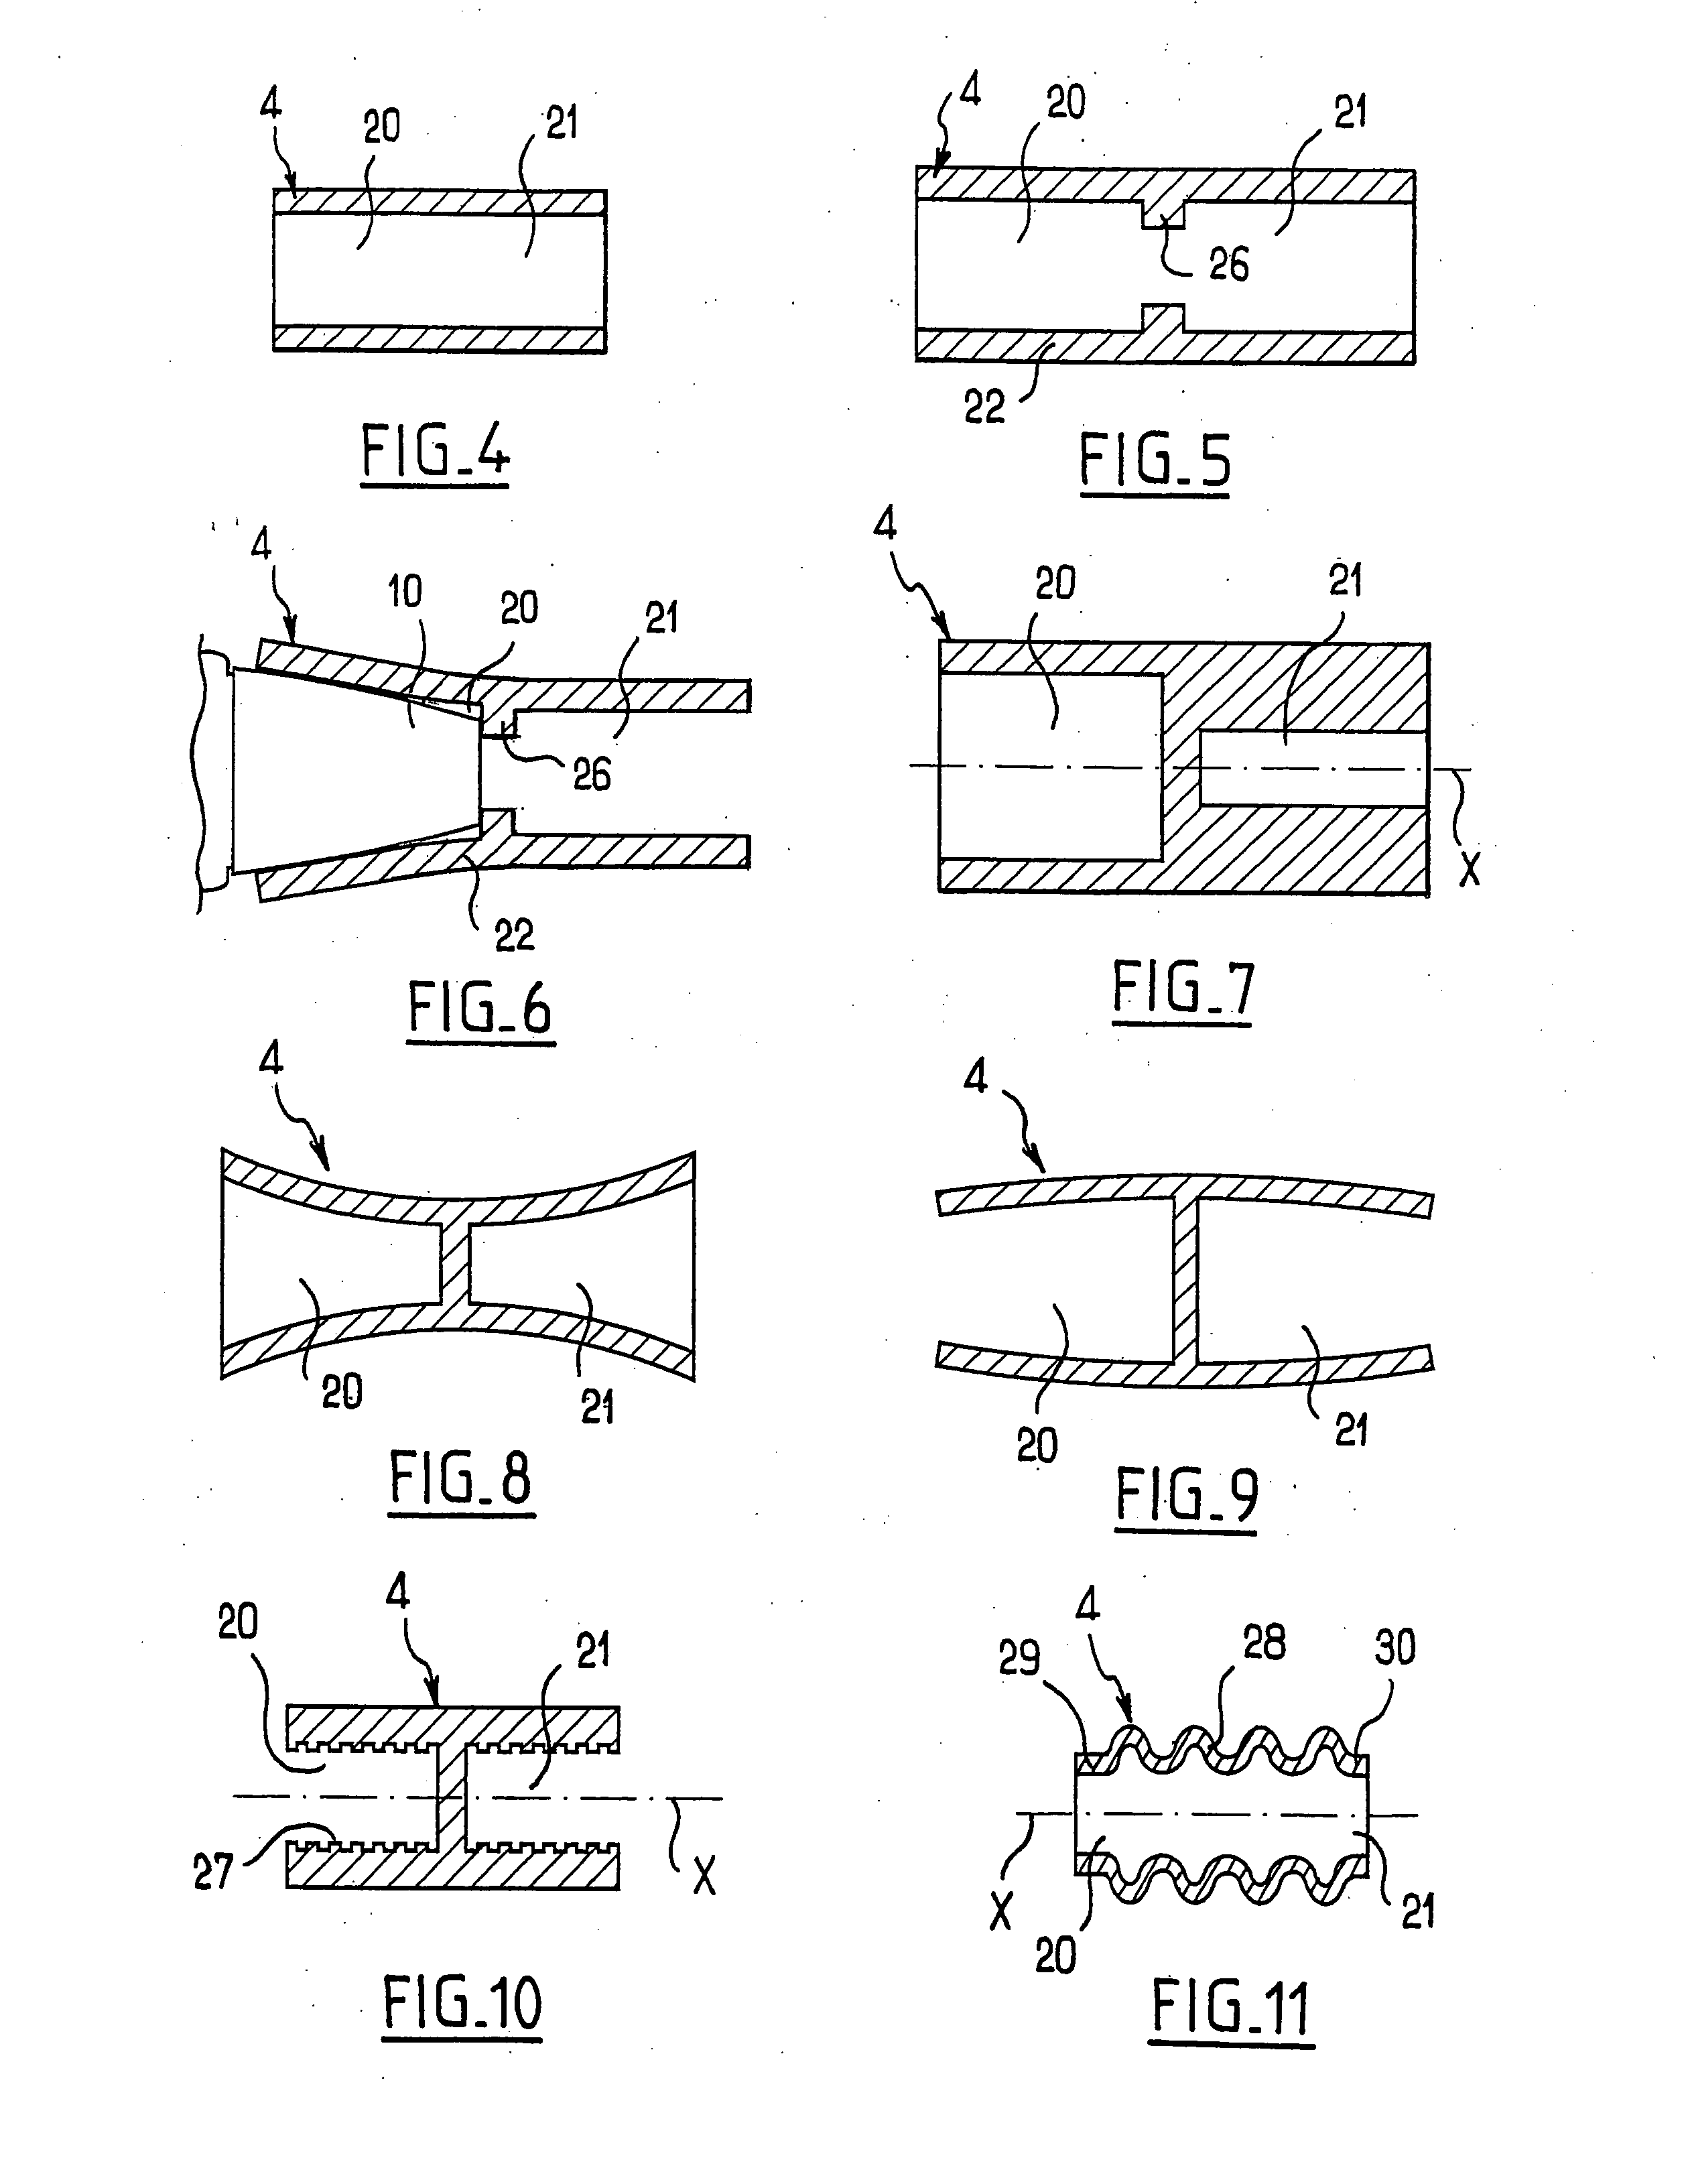 Packaging and applicator device including a coupling member enabling two receptacles to be united